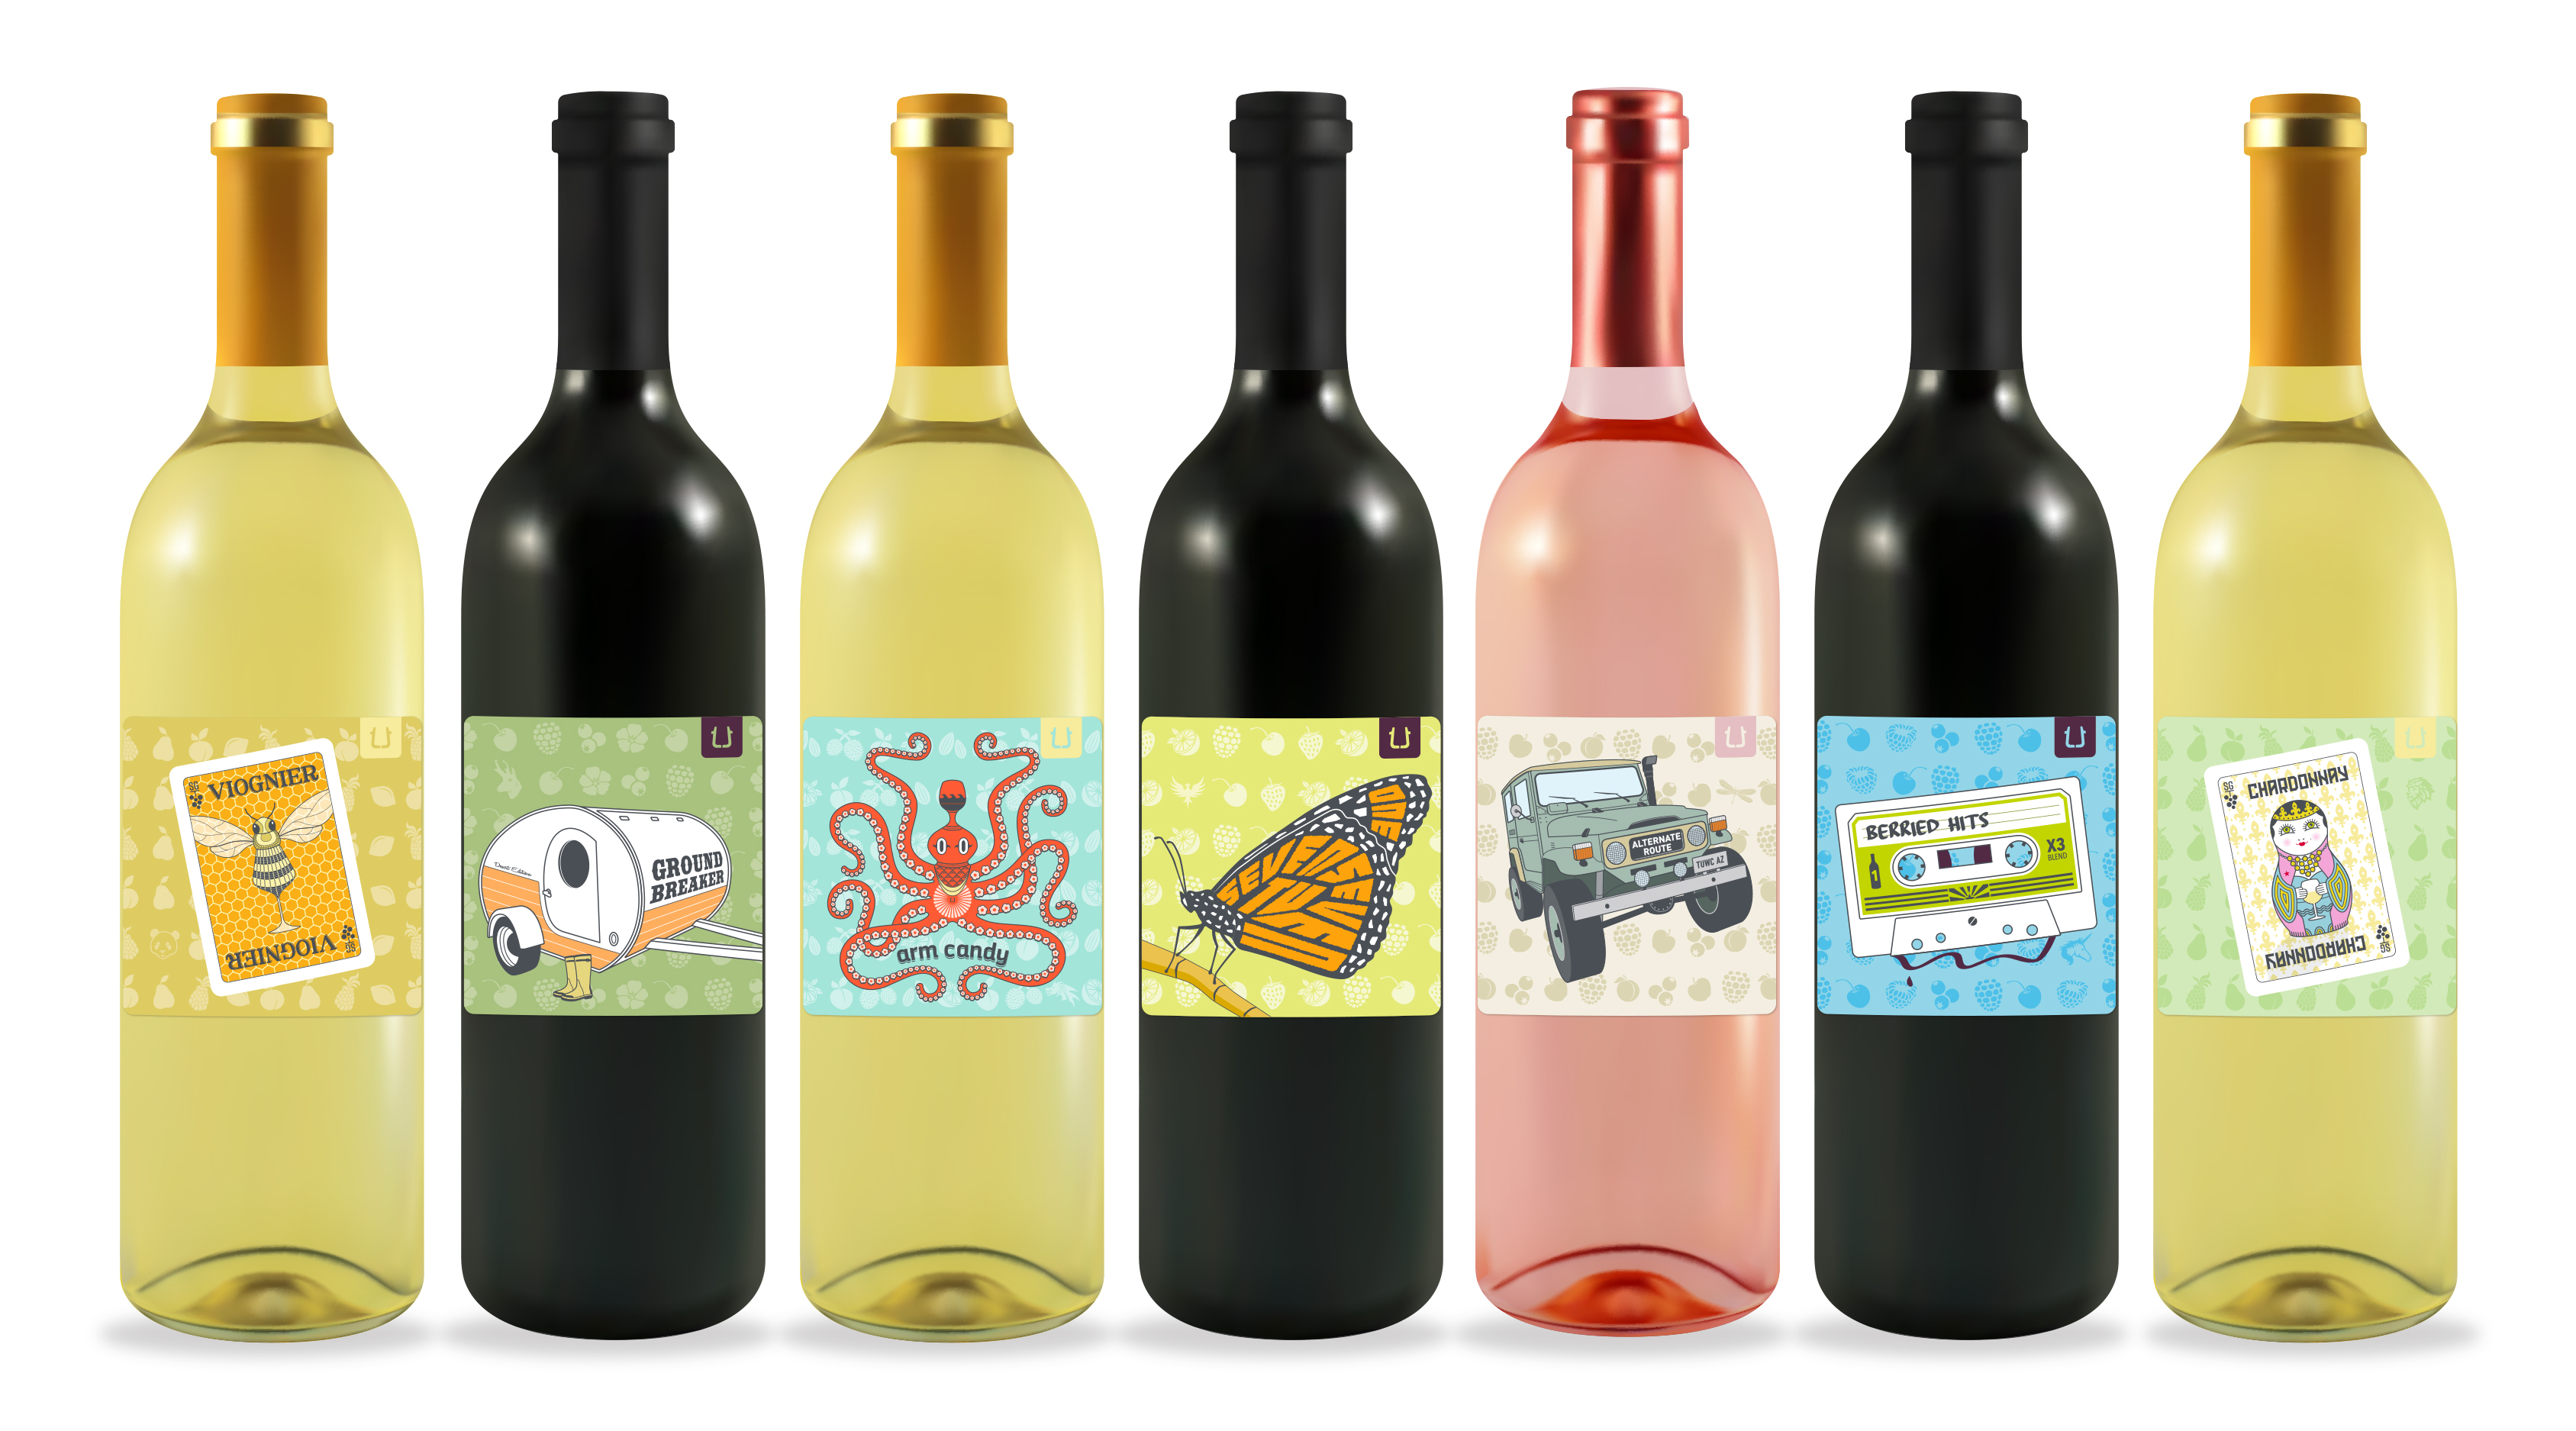 featured image two:Twisted Union Wine Co. Brand